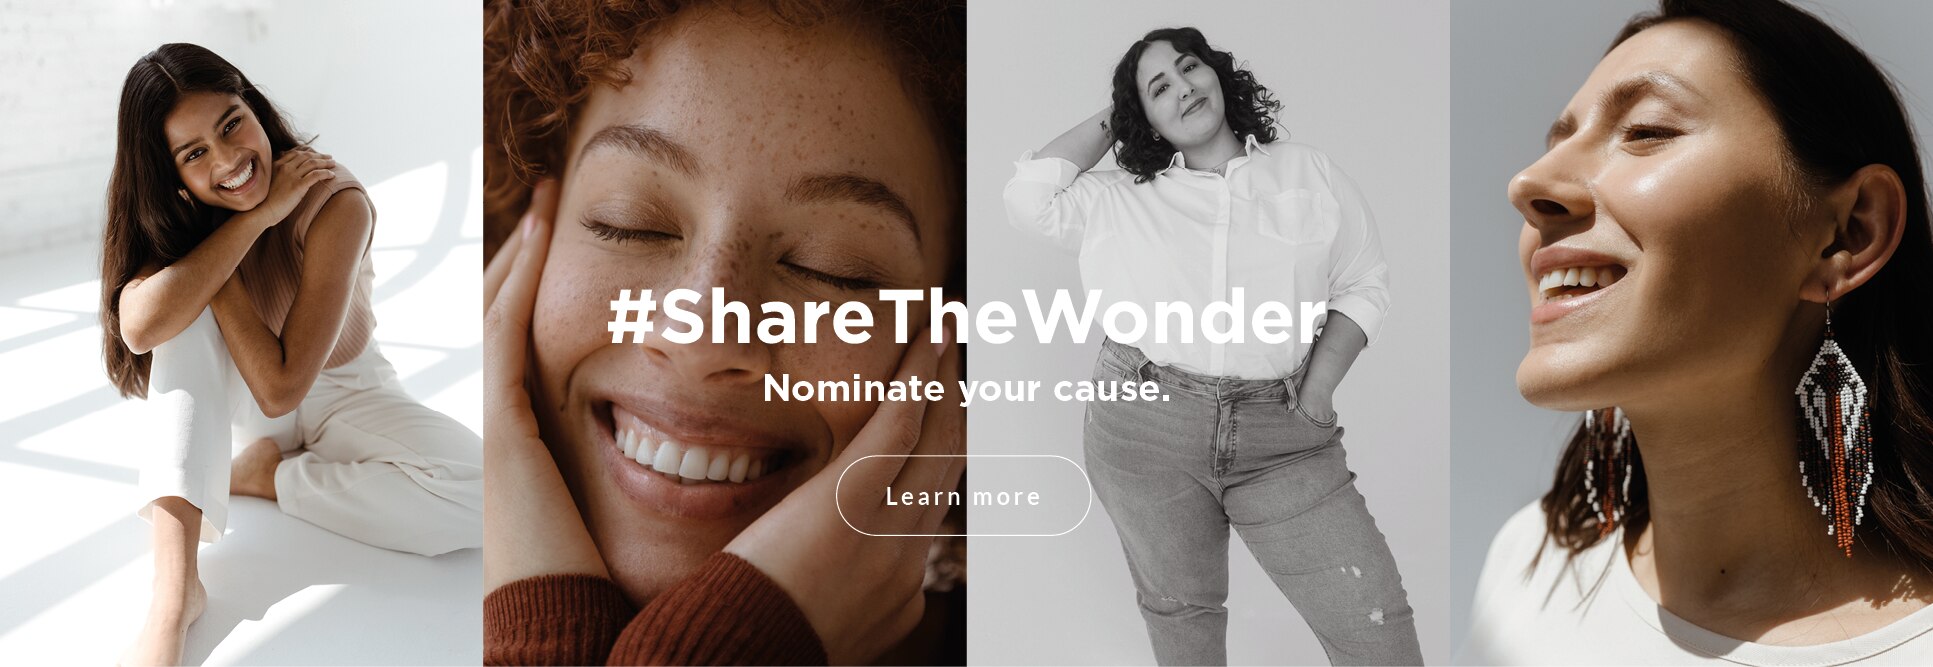 #ShareTheWonder Share your voice, make a difference. You're invited to nominate a cause. Learn more & Nominate